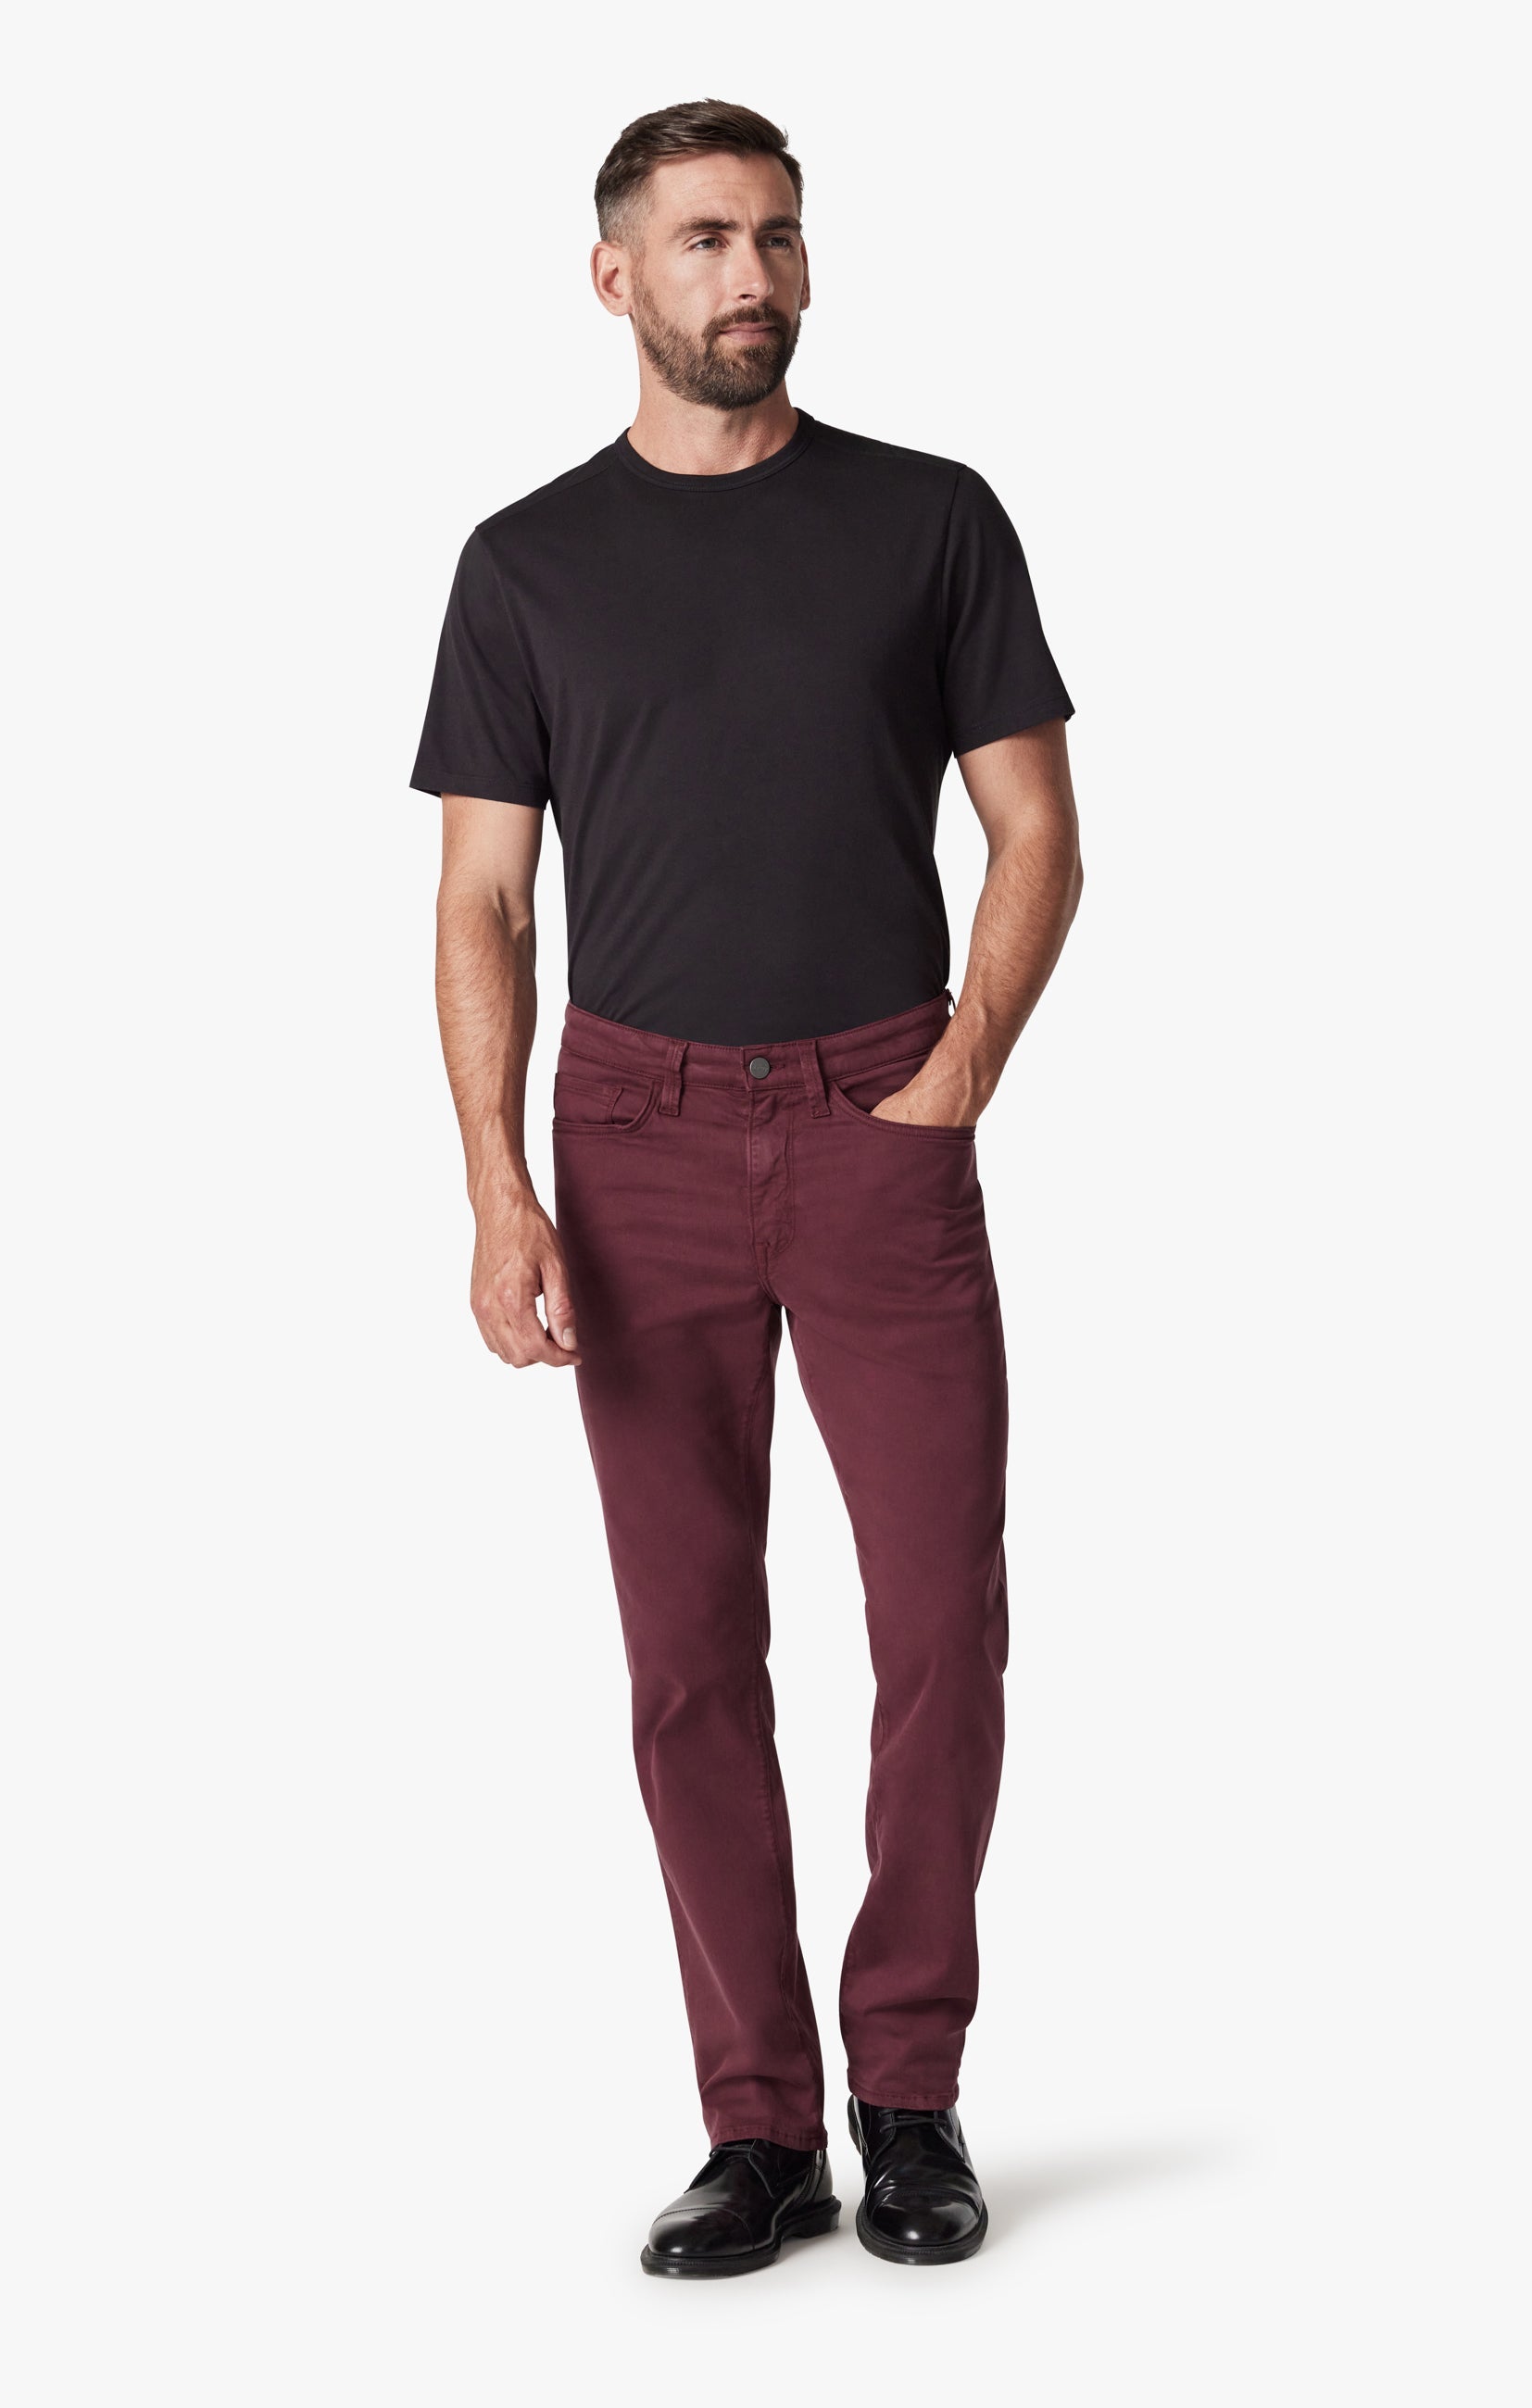 Charisma Relaxed Straight Leg Pants In Tawny Port Twill Image 2